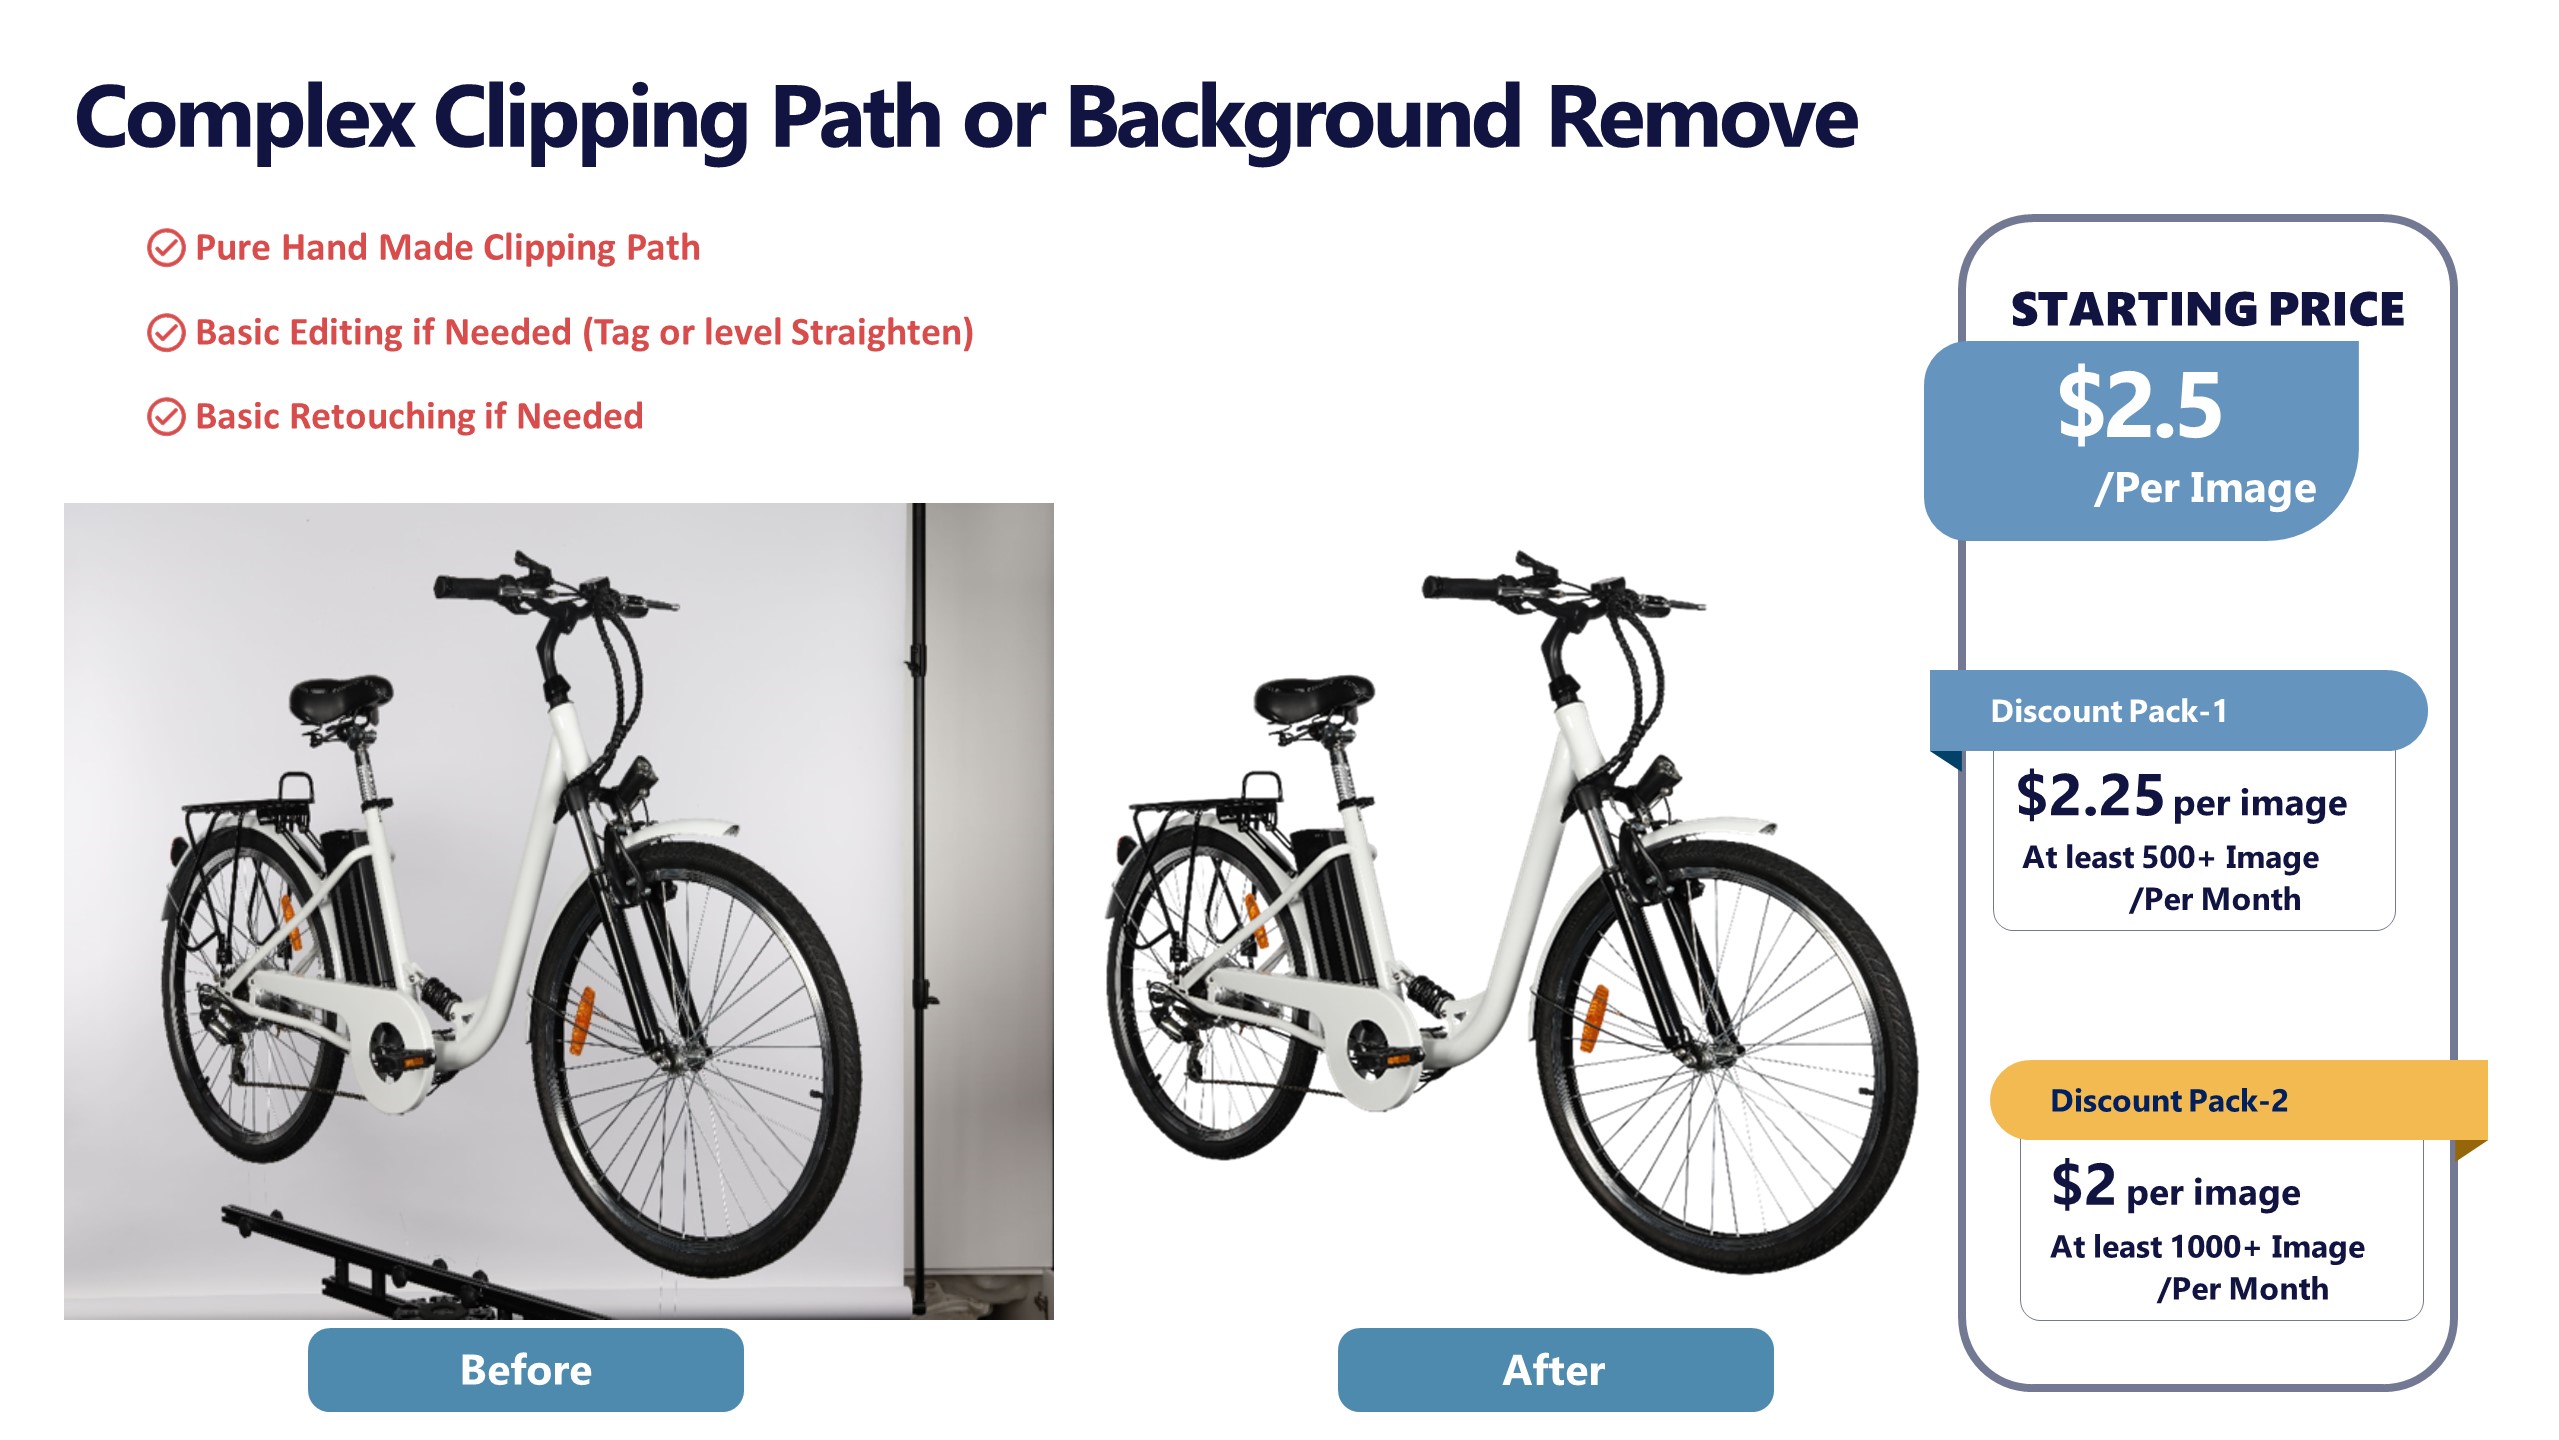 Complex Clipping Path Dot Clipping